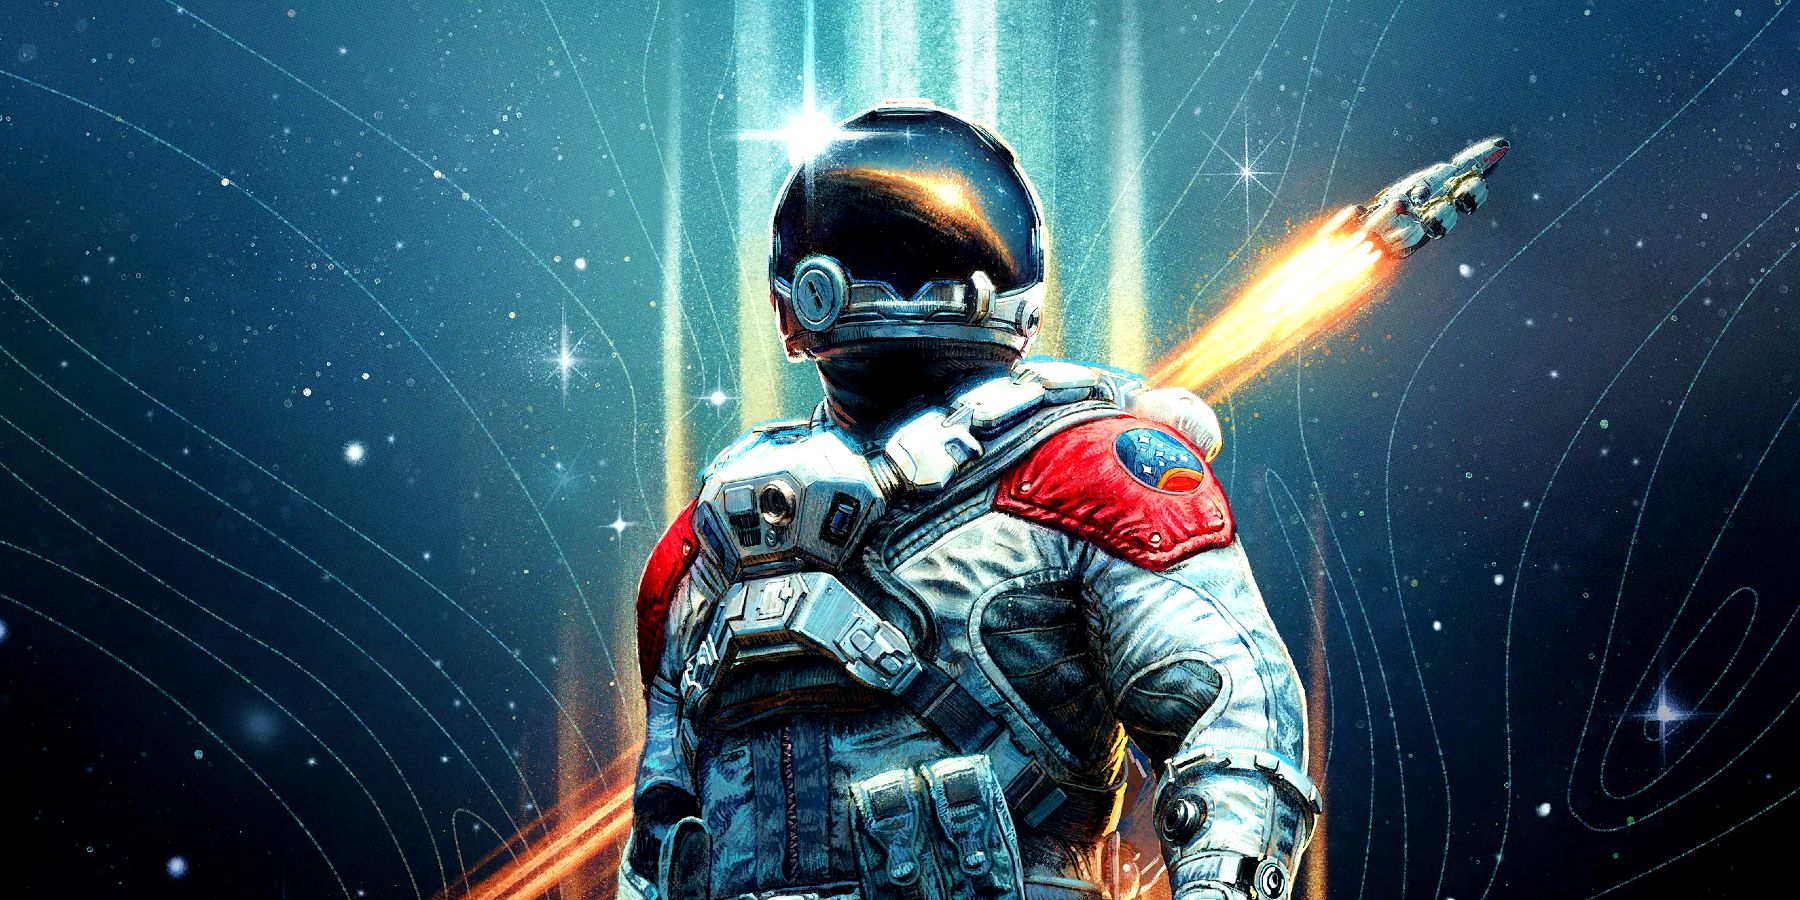 A Starfield character wearing a white and red space suit. Behind them is the Frontier, the game's default spaceship, flying into space.